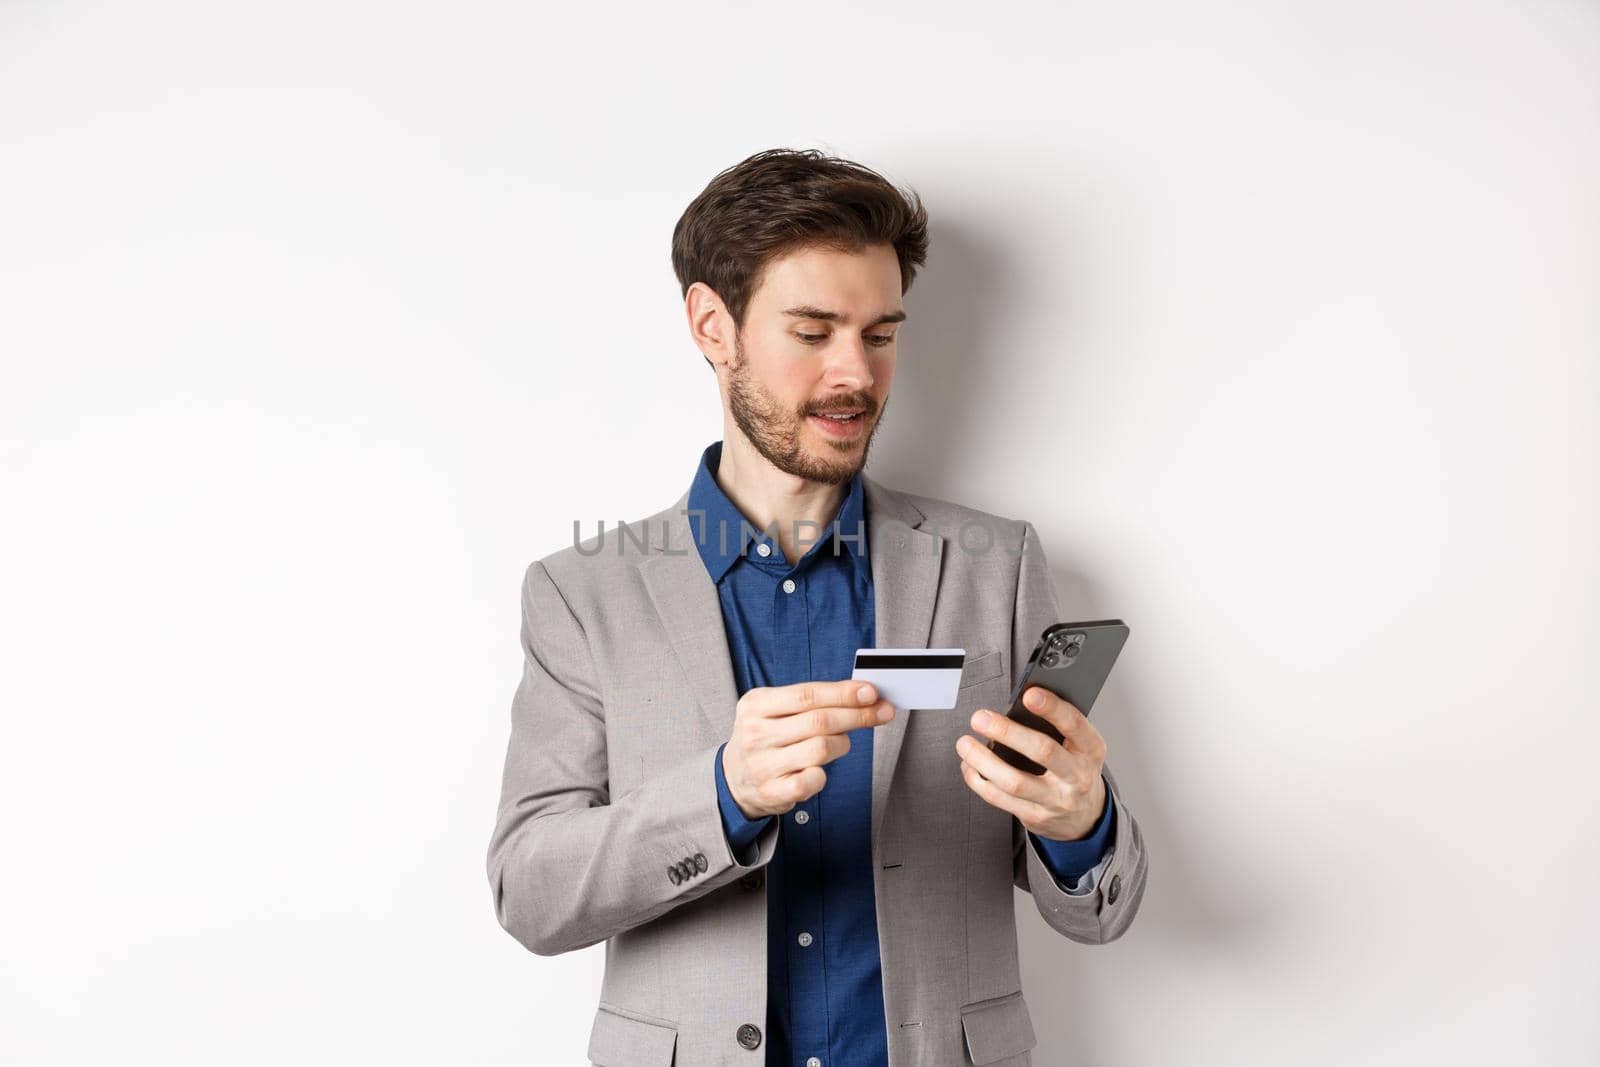 Online shopping. Smiling businessman paying with credit card on smartphone, sending money, standing in suit on white background.